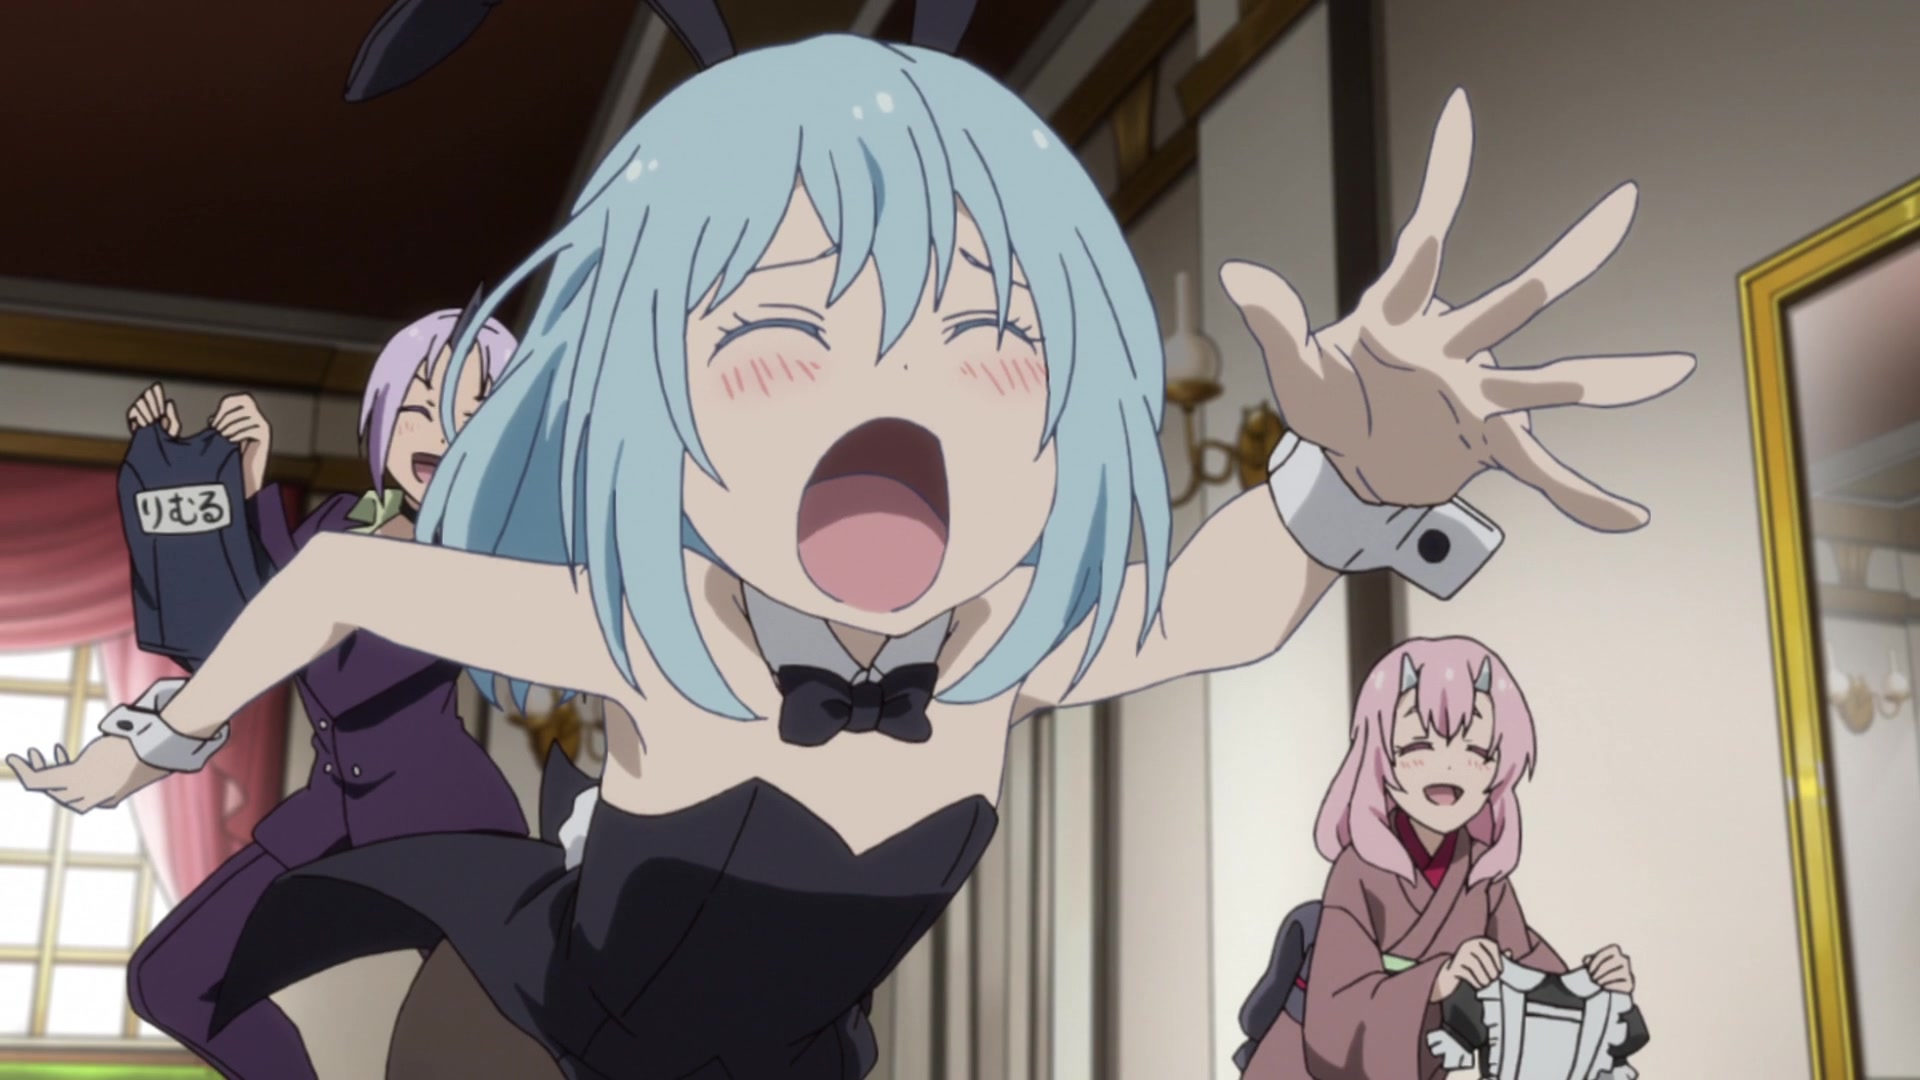 Slime Diaries: That Time I Got Reincarnated as a Slime Images. 